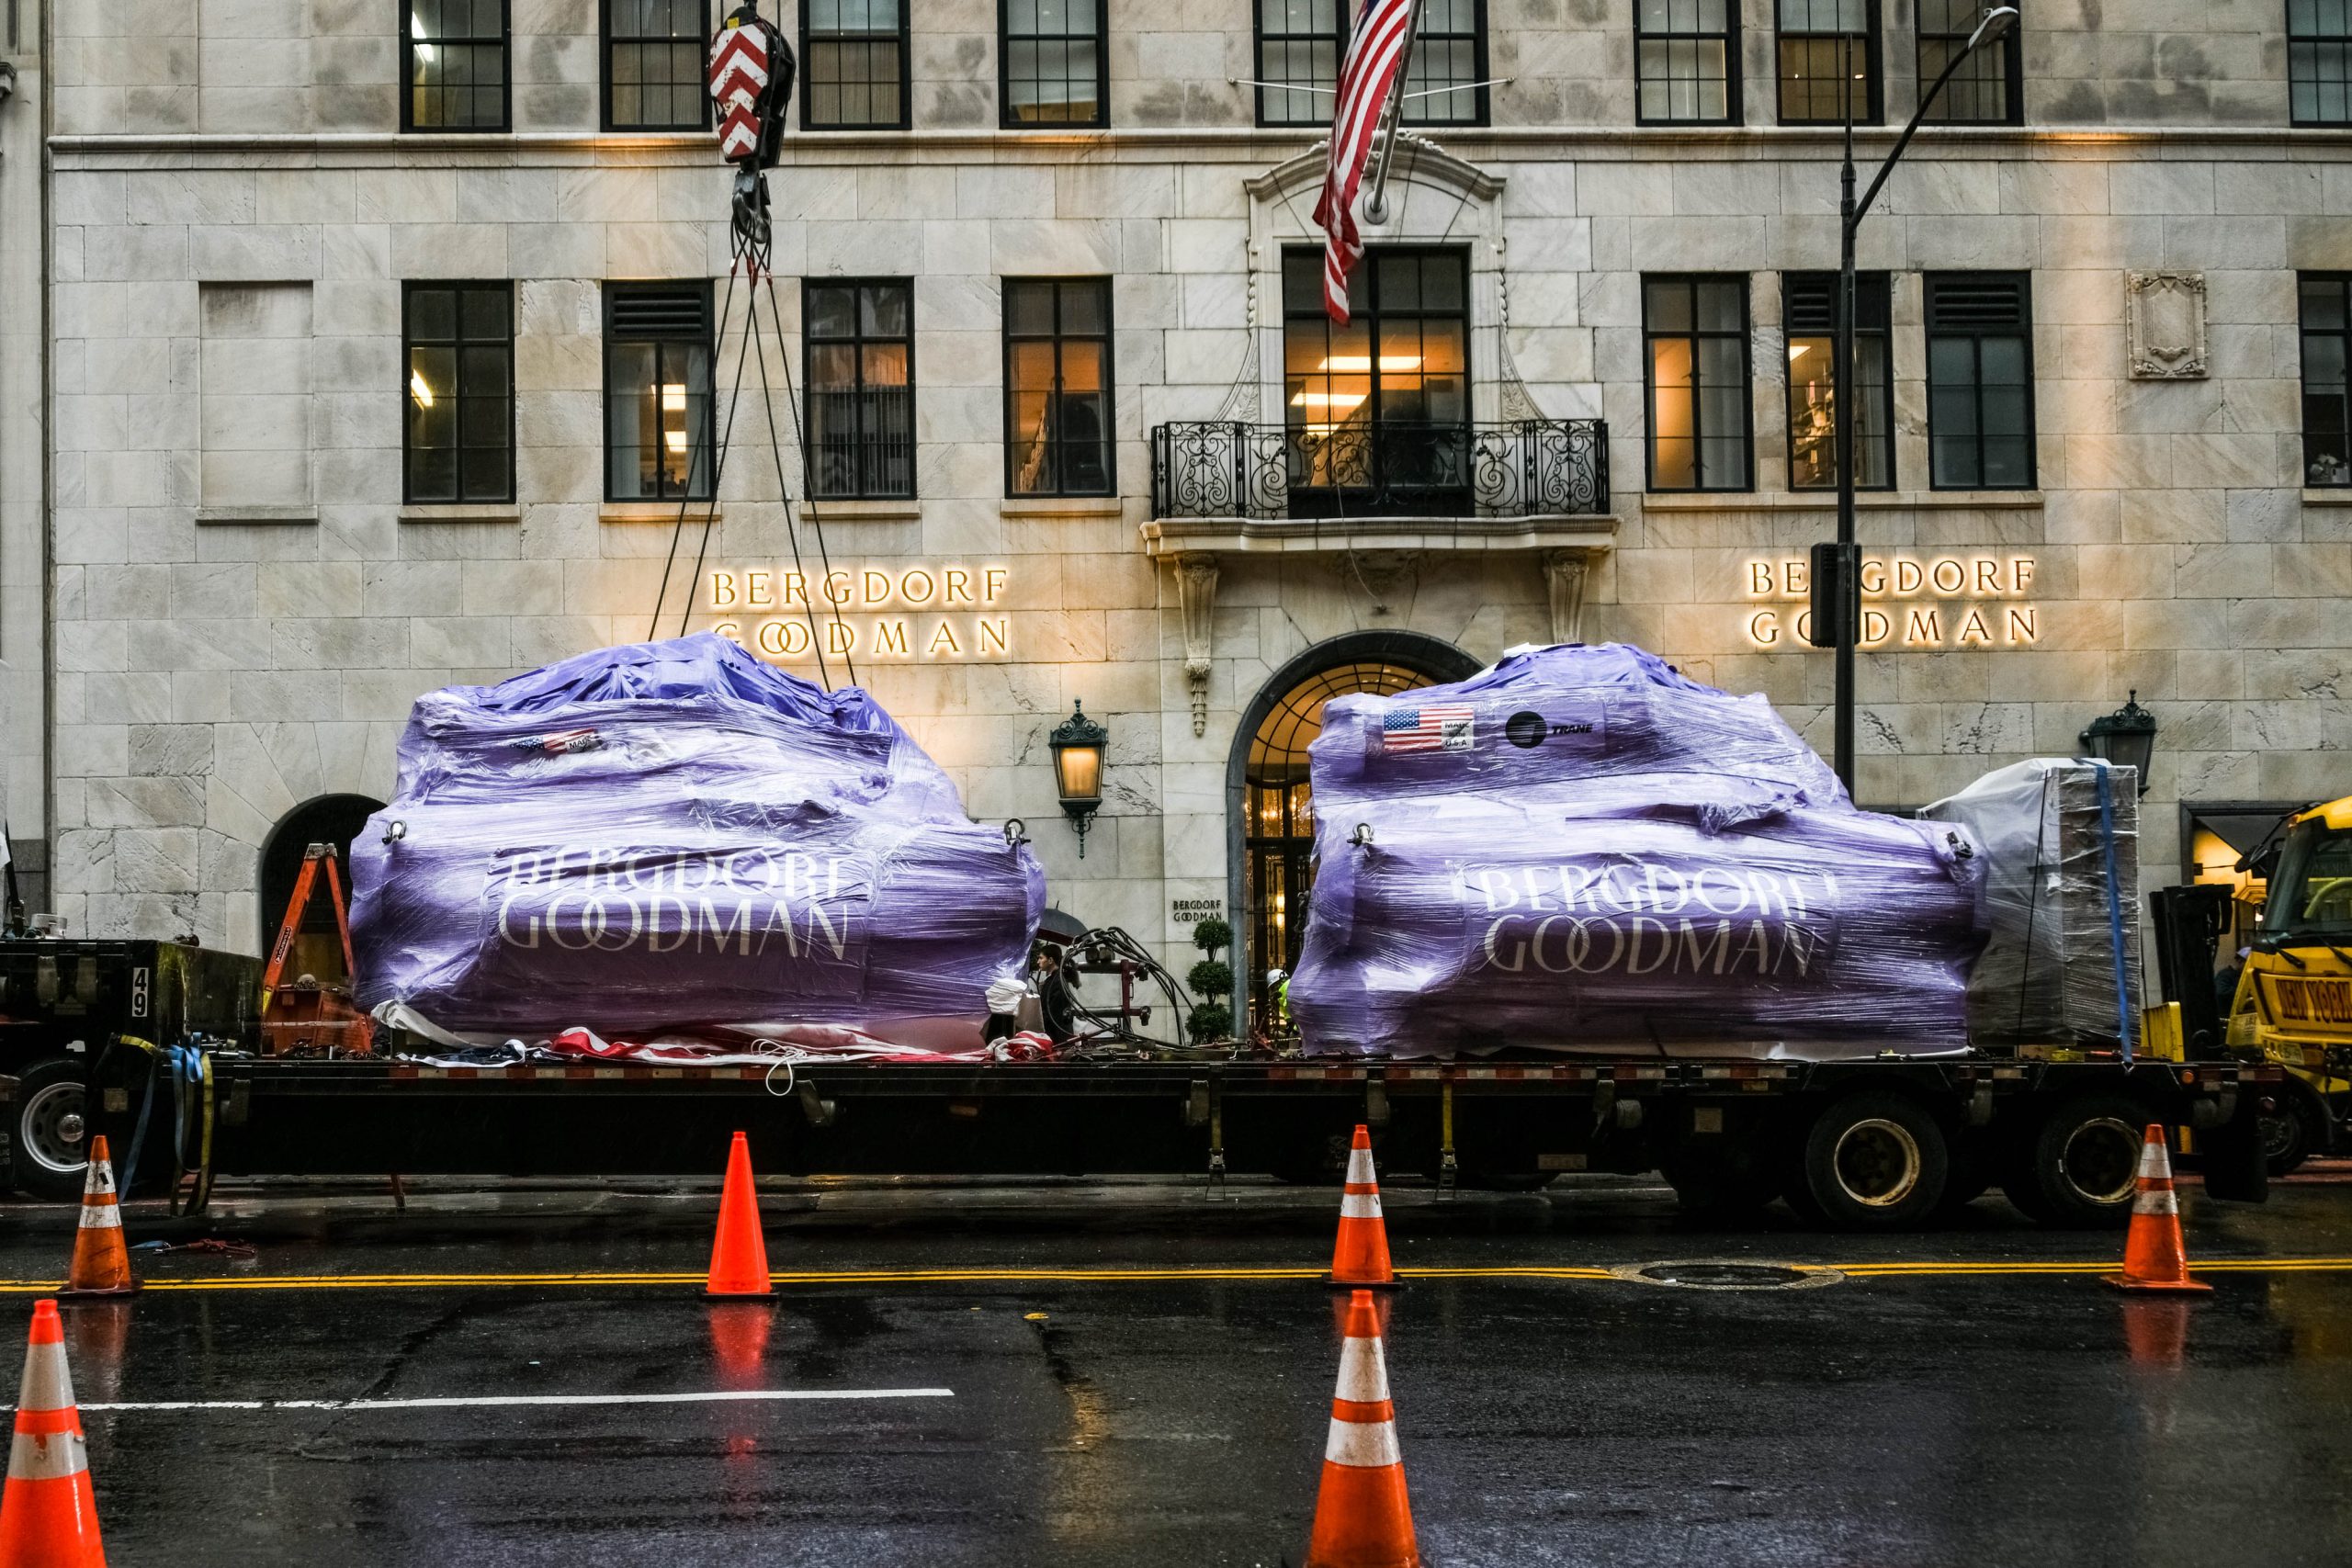 Bergdorf Goodman continues expansion with new salon